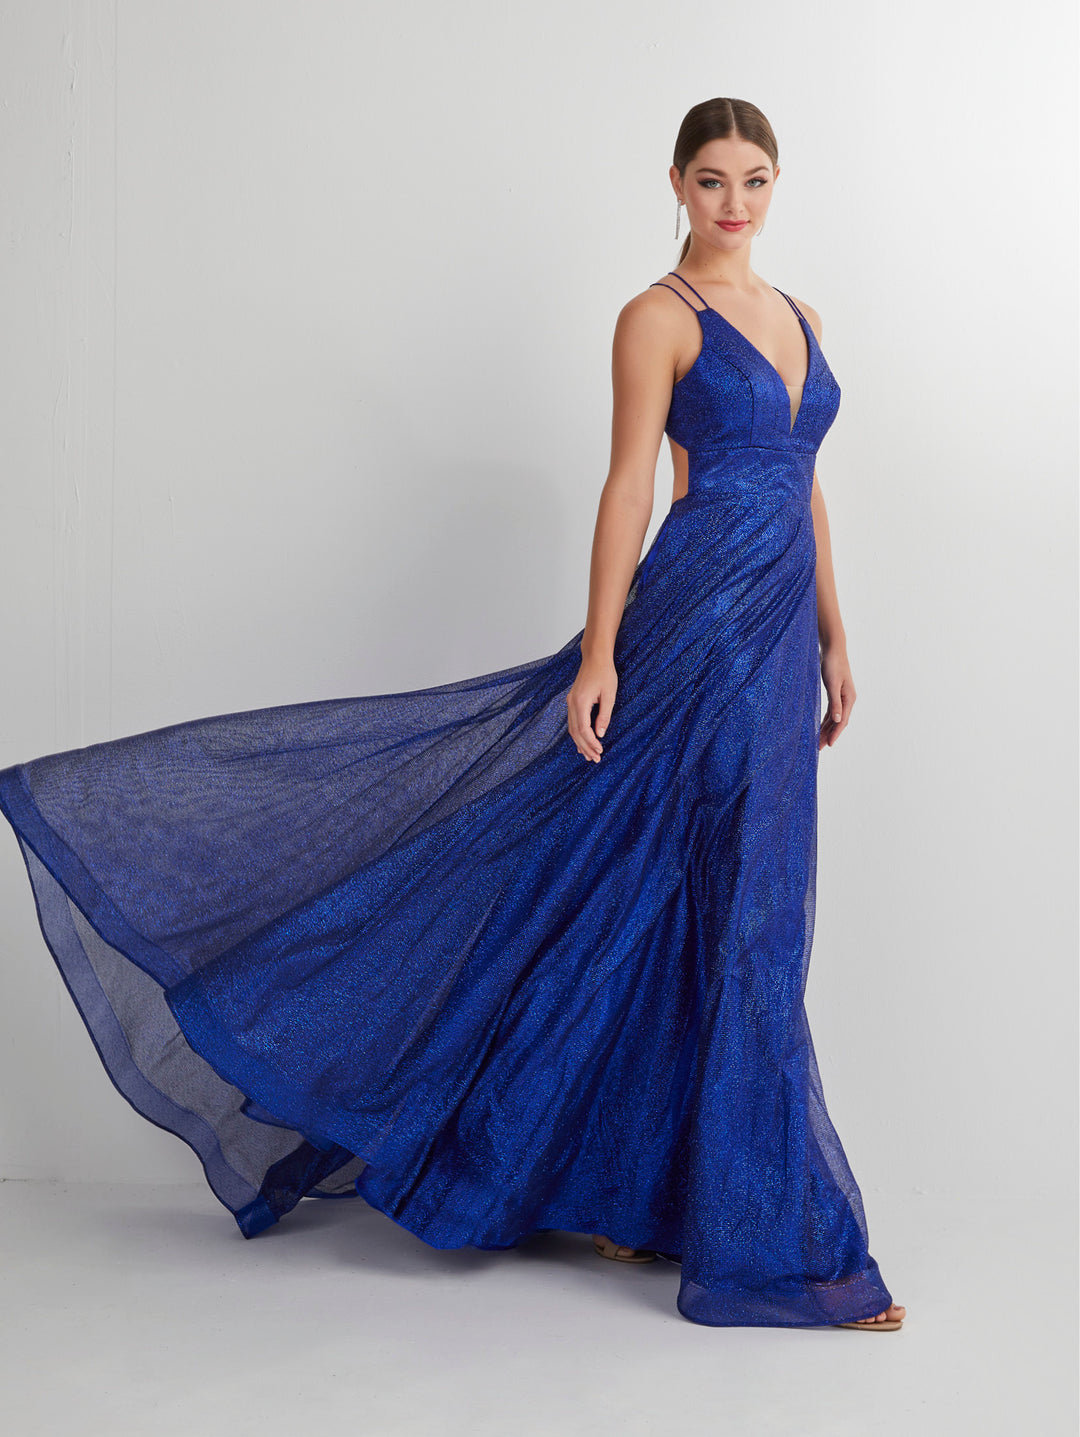 Glitter Tulle Sleeveless A-line Gown by Studio 17 12895